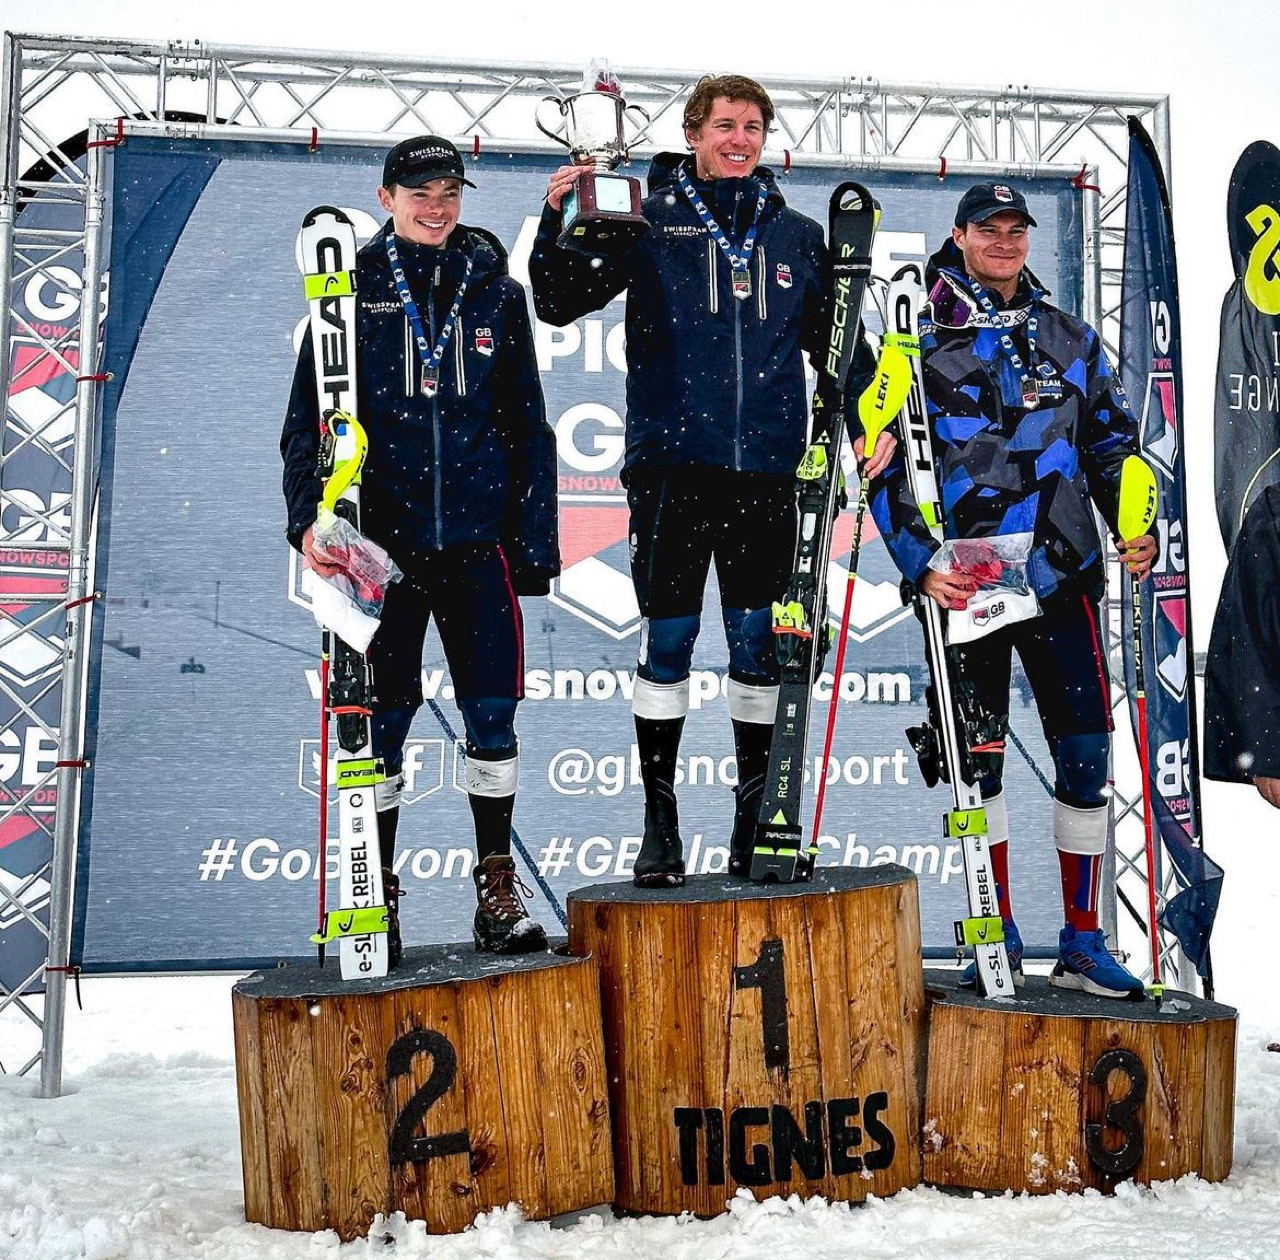 Major and Gorringe top British National Championships podiums at weather affected GB Alpine Championships